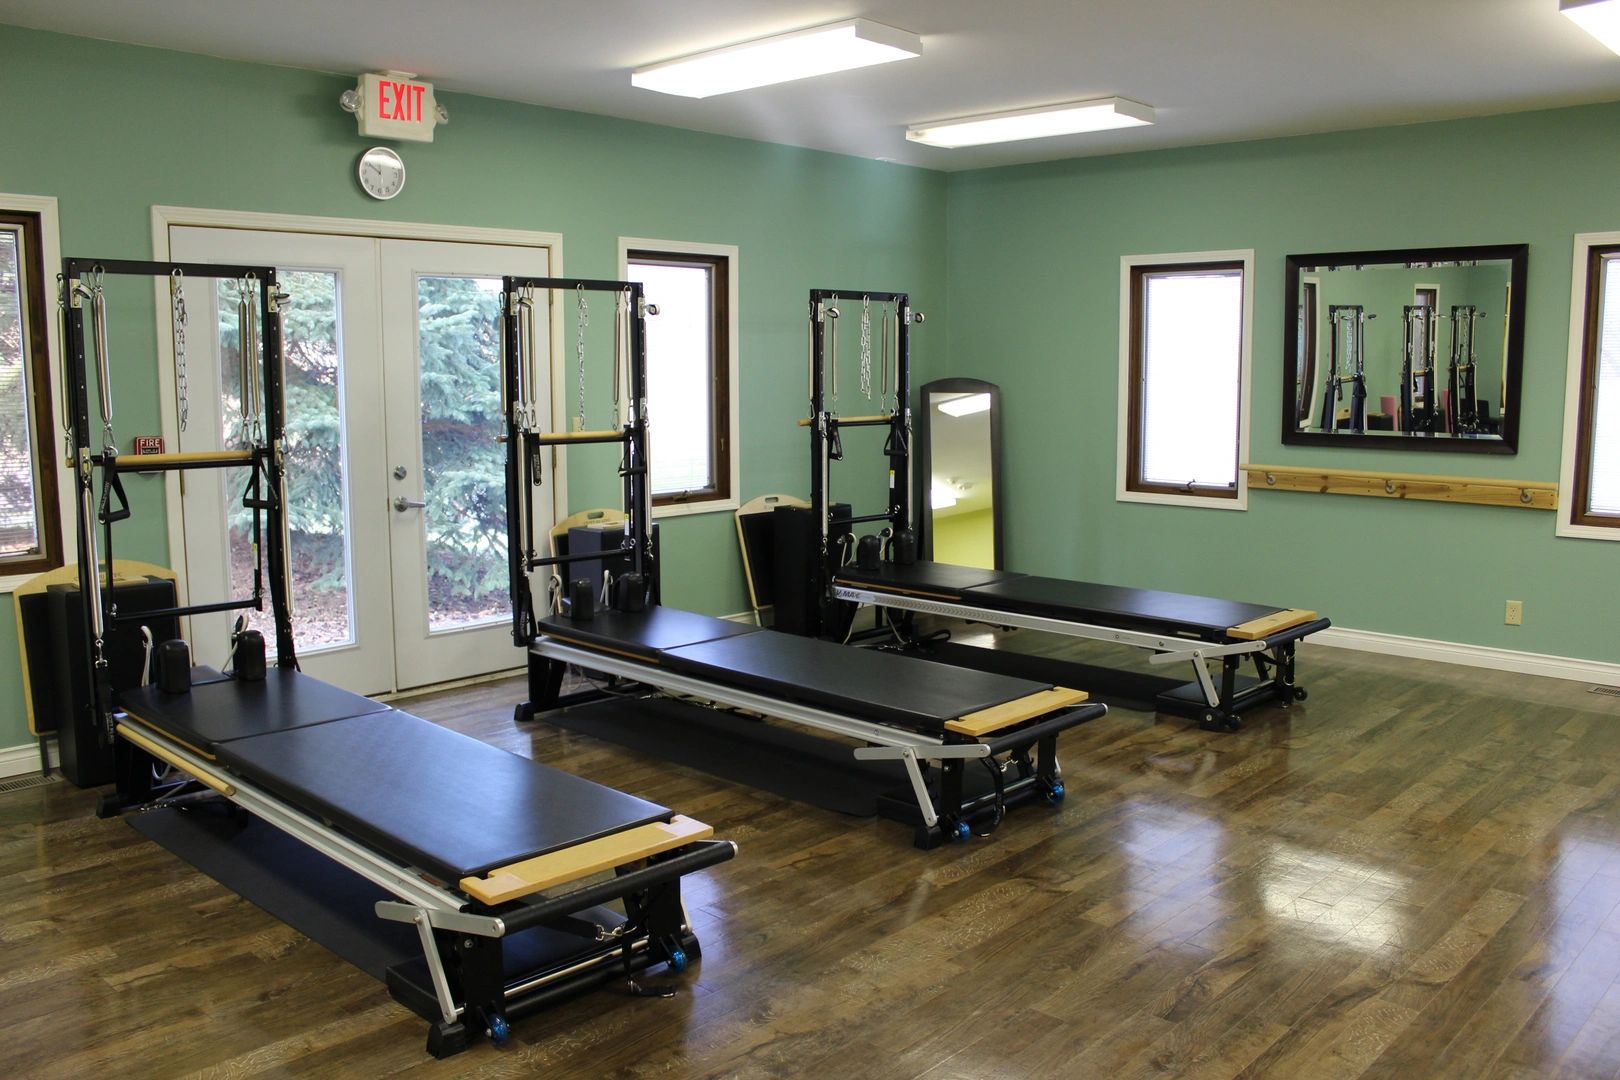 Thrive Pilates Studio in Sioux Falls, SD.